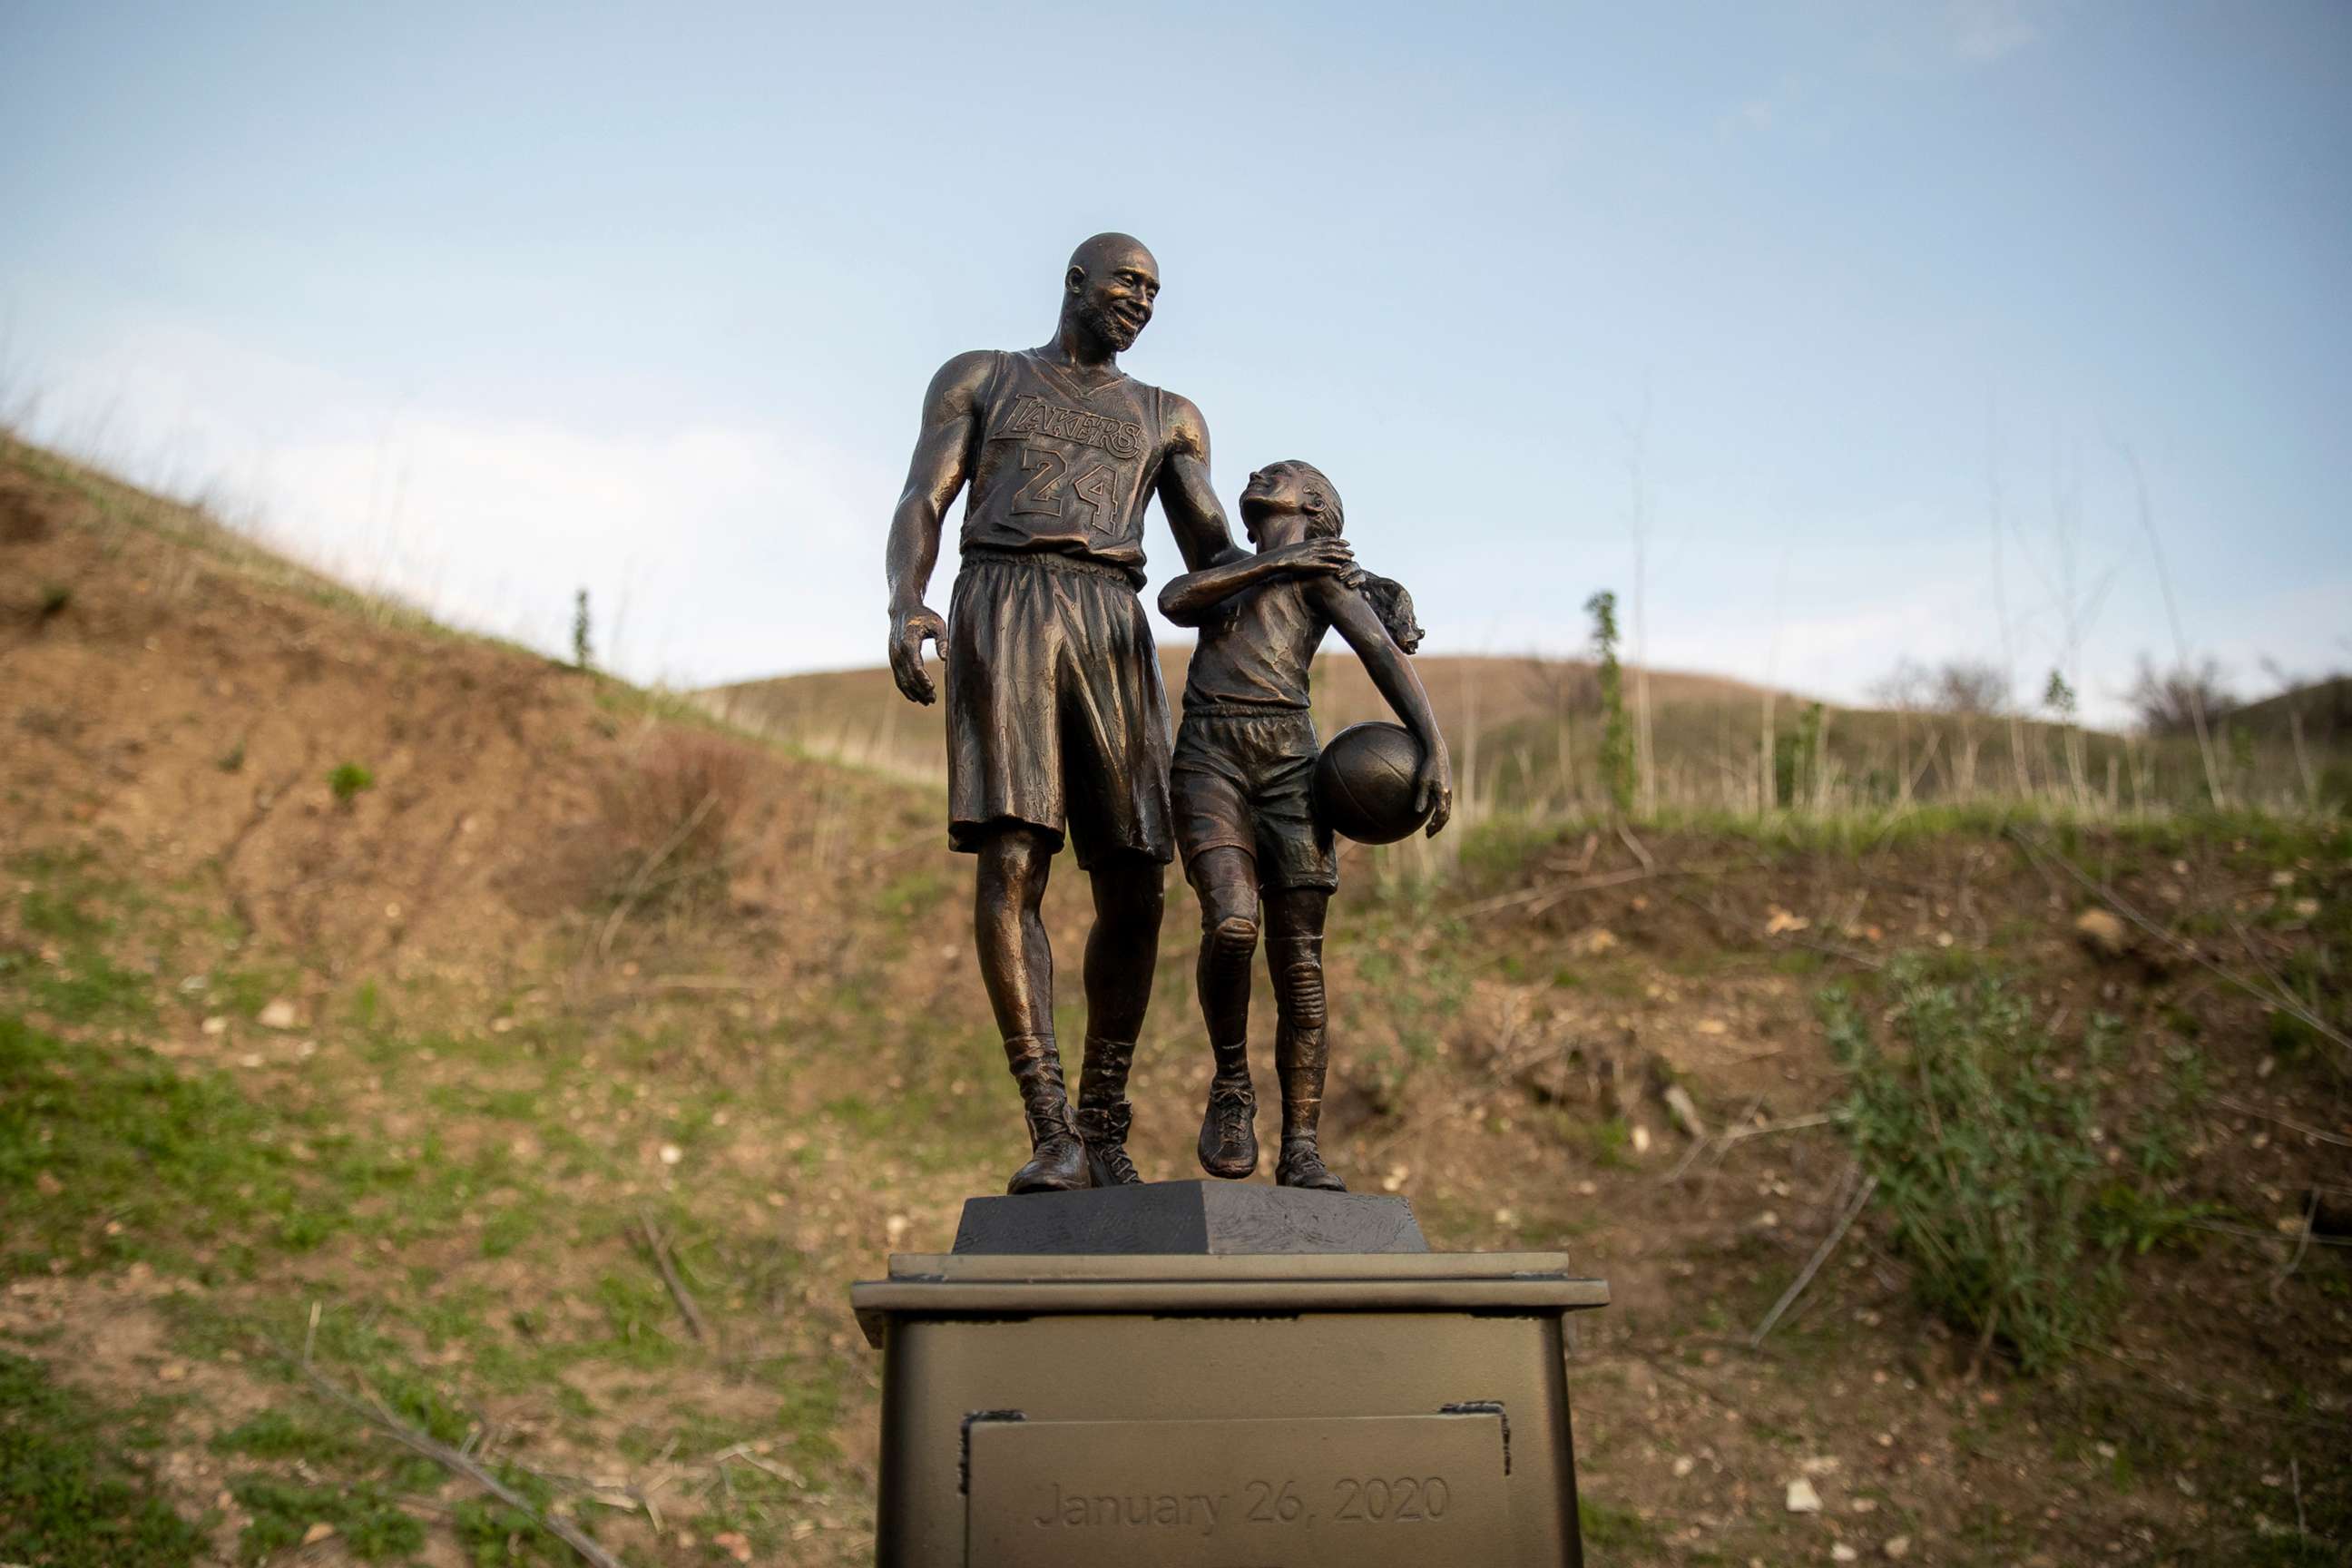 PHOTO: In this Jan. 26, 2022, file photo, artist Dan Medina's bronze sculpture depicting Kobe Bryant, daughter Gianna Bryant, and the names of those who died in a helicopter crash in 2020, is seen during a temporary memorial display in Calabasas, Calif.